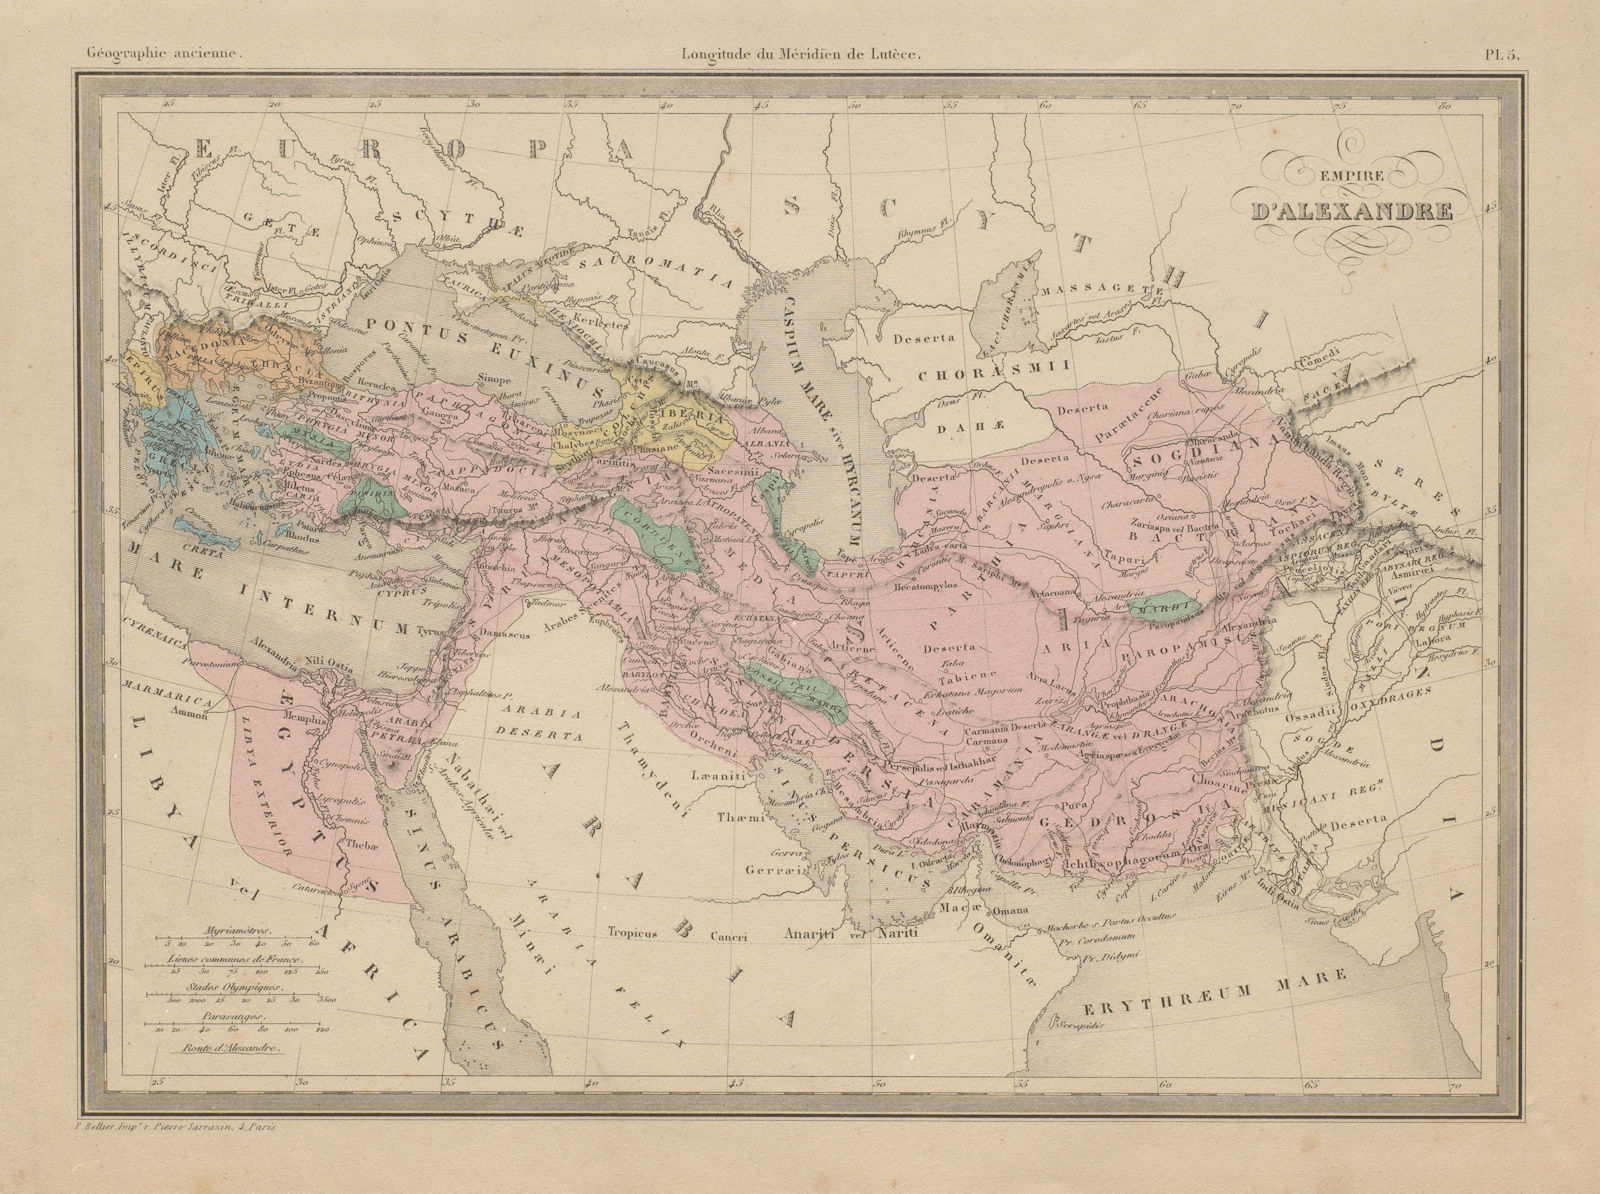 Empire d'Alexandre / of Alexander the Great. Middle East. MALTE-BRUN c1871 map